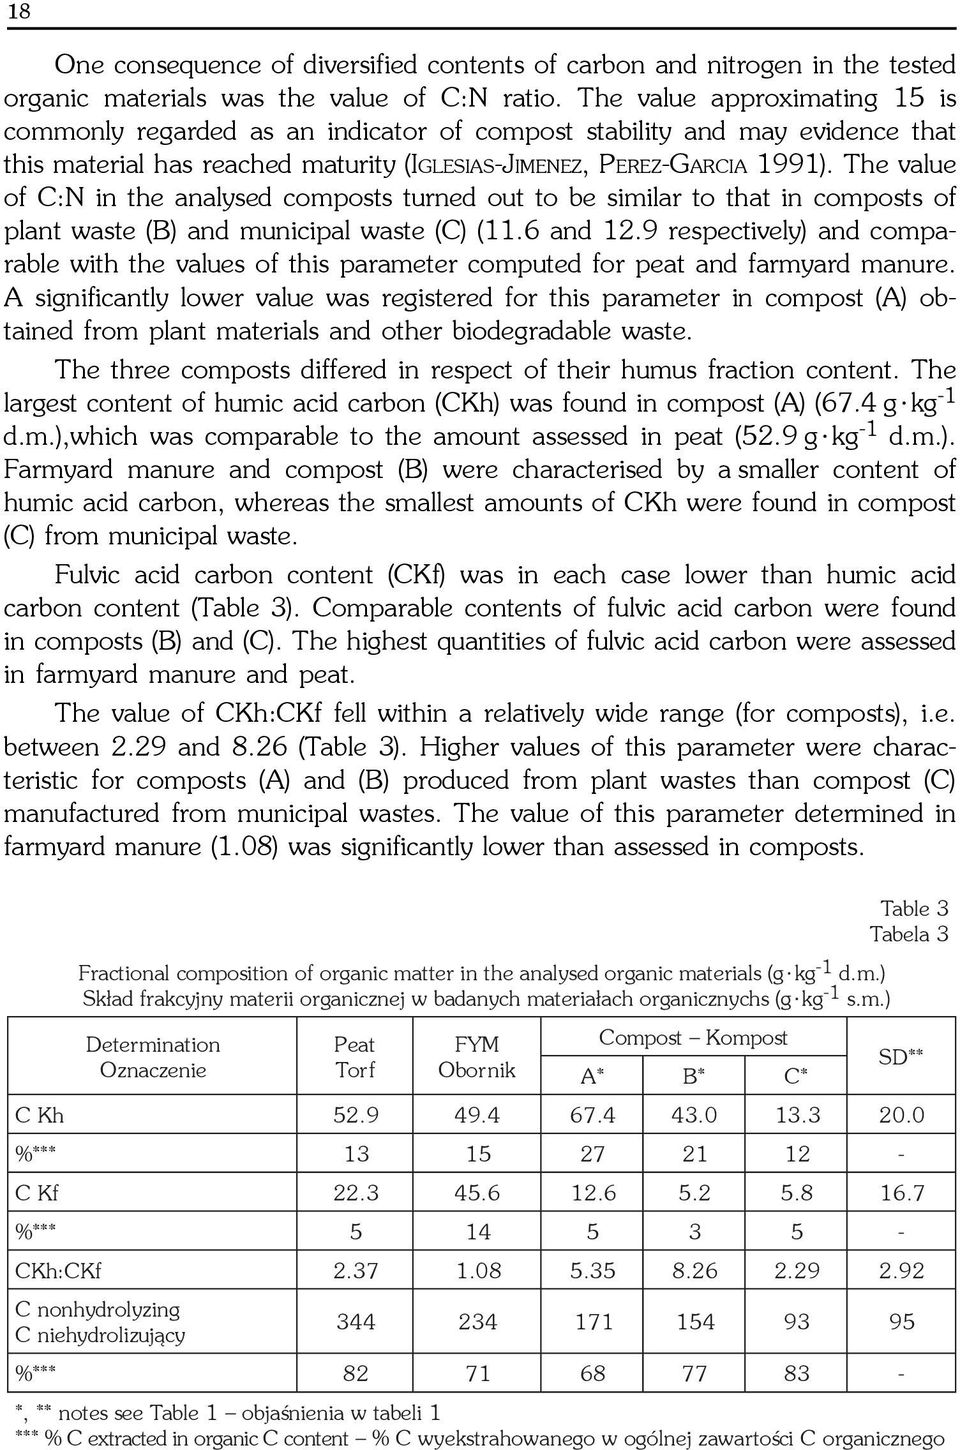 The value of C:N in the analysed composts turned out to be similar to that in composts of plant waste (B) and municipal waste (C) (11.6 and 12.